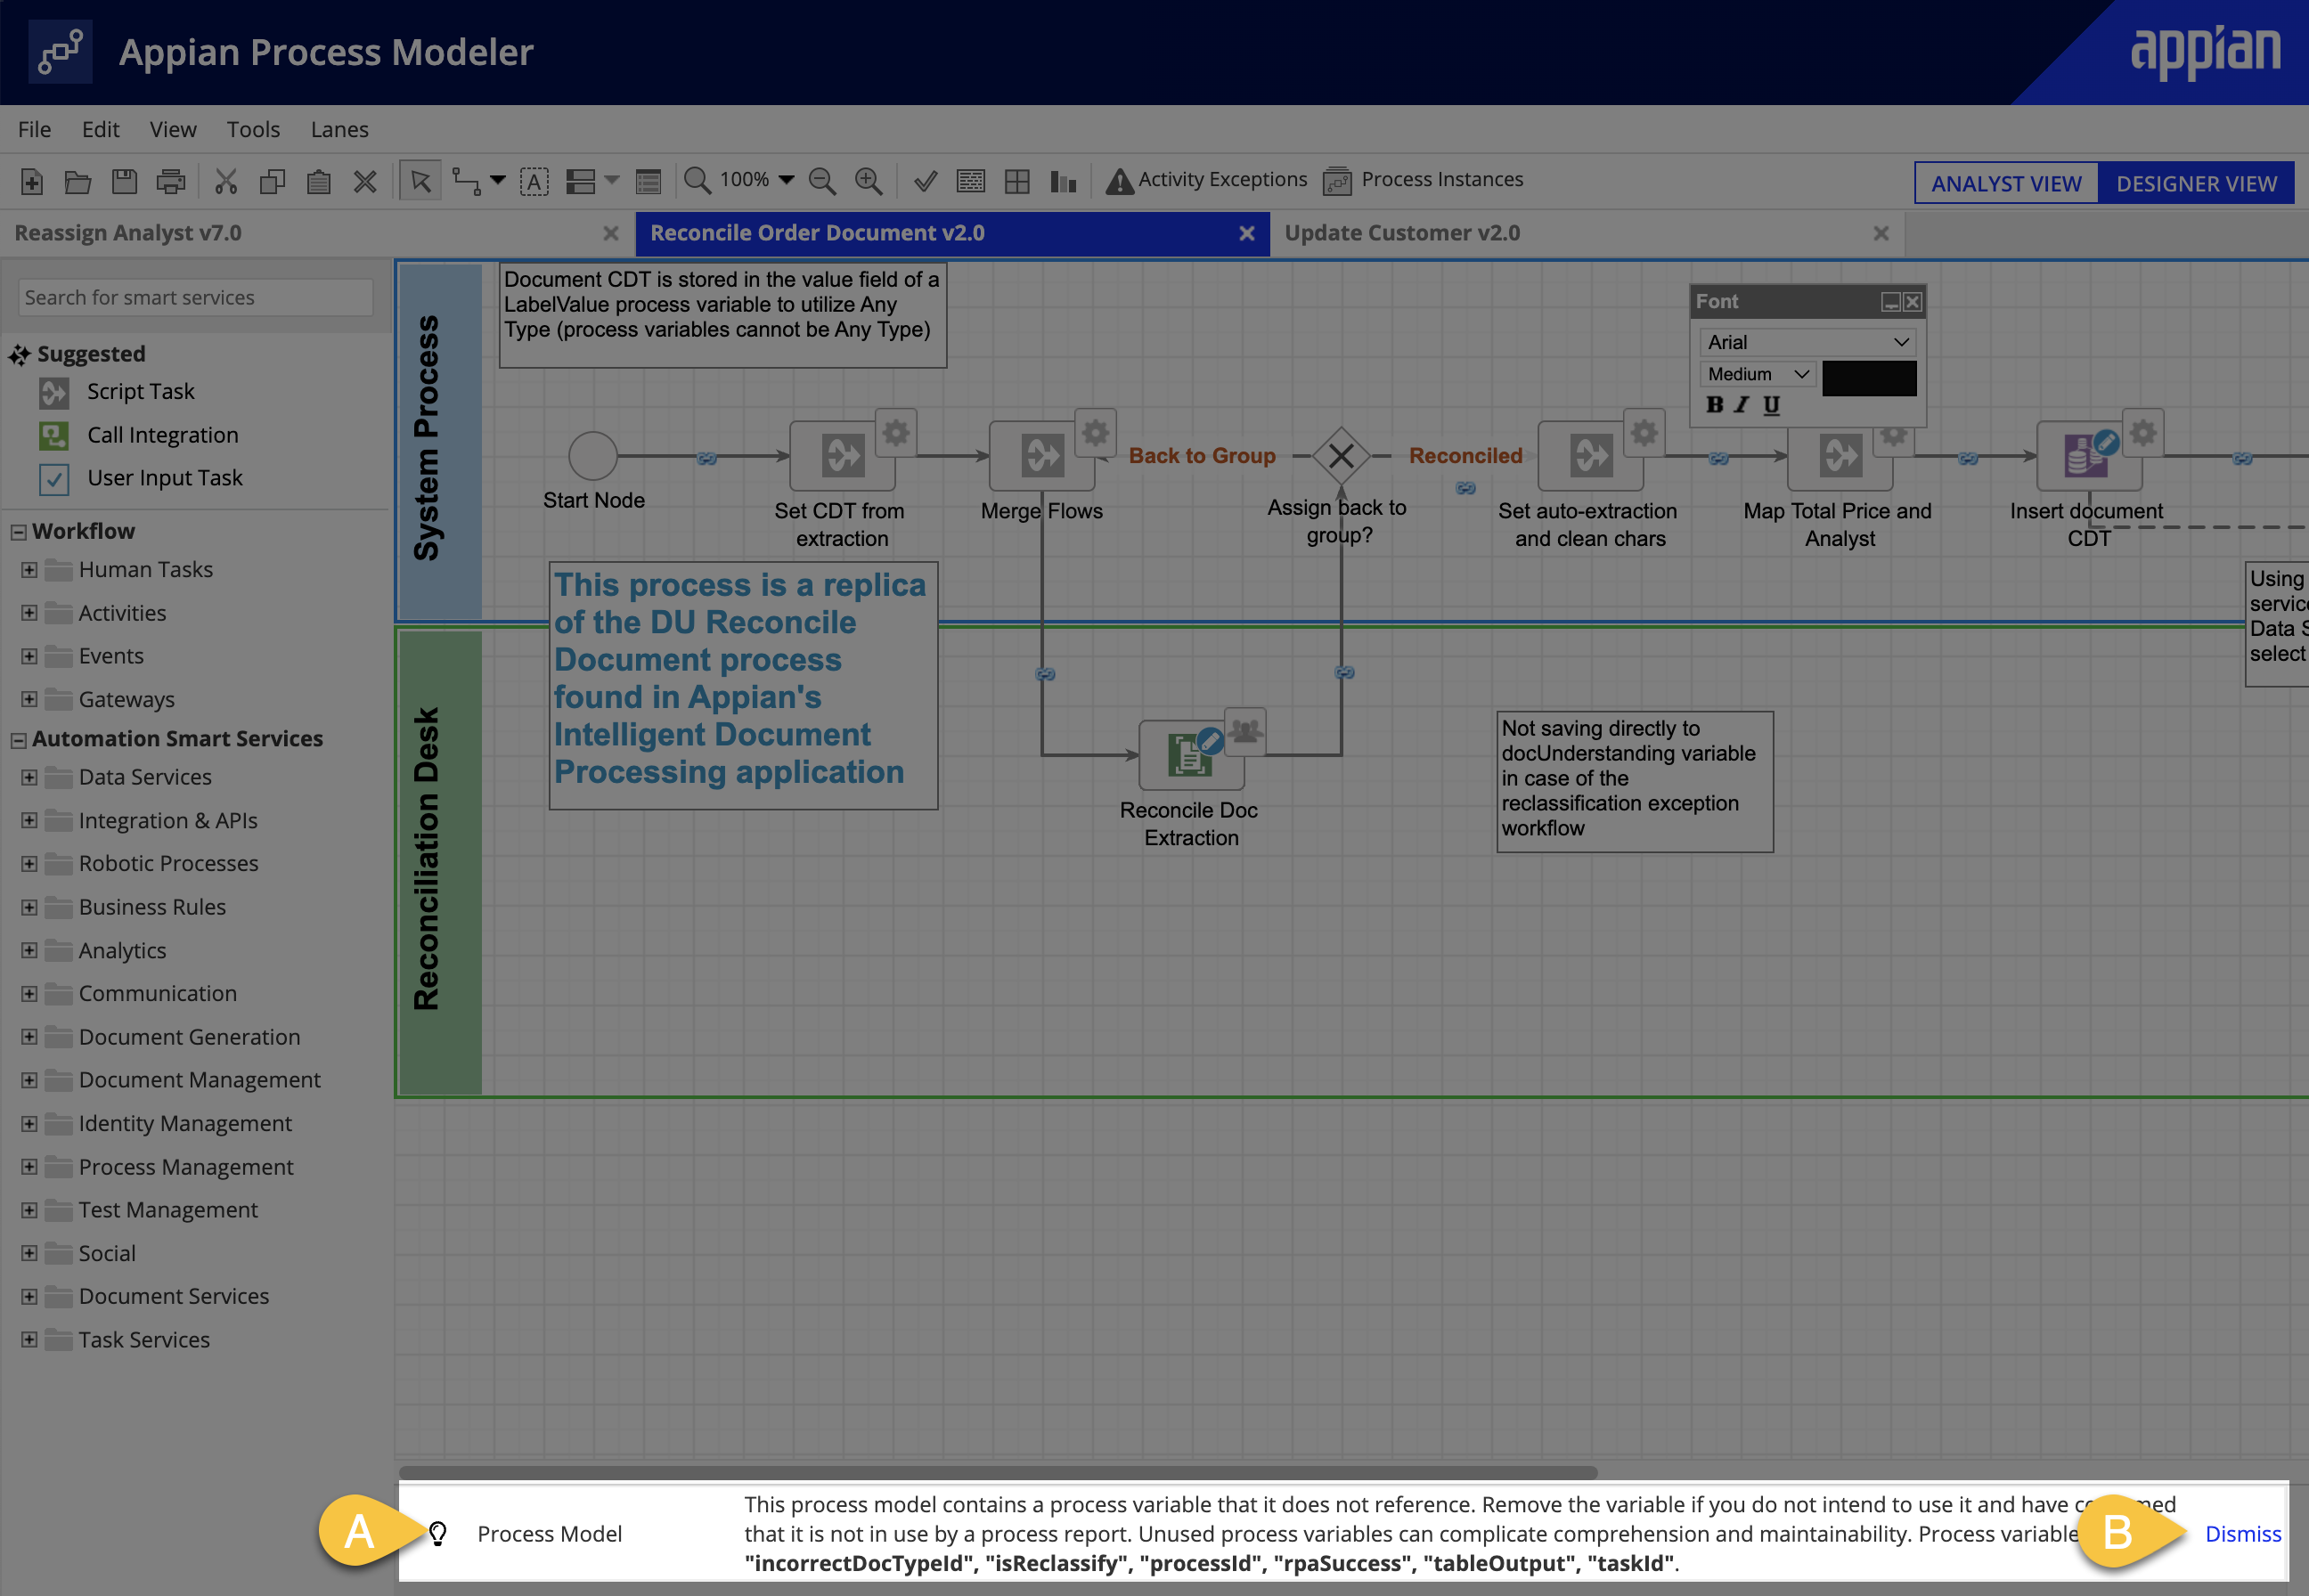 images/appian_recommendations_process_modeler_annotated.png